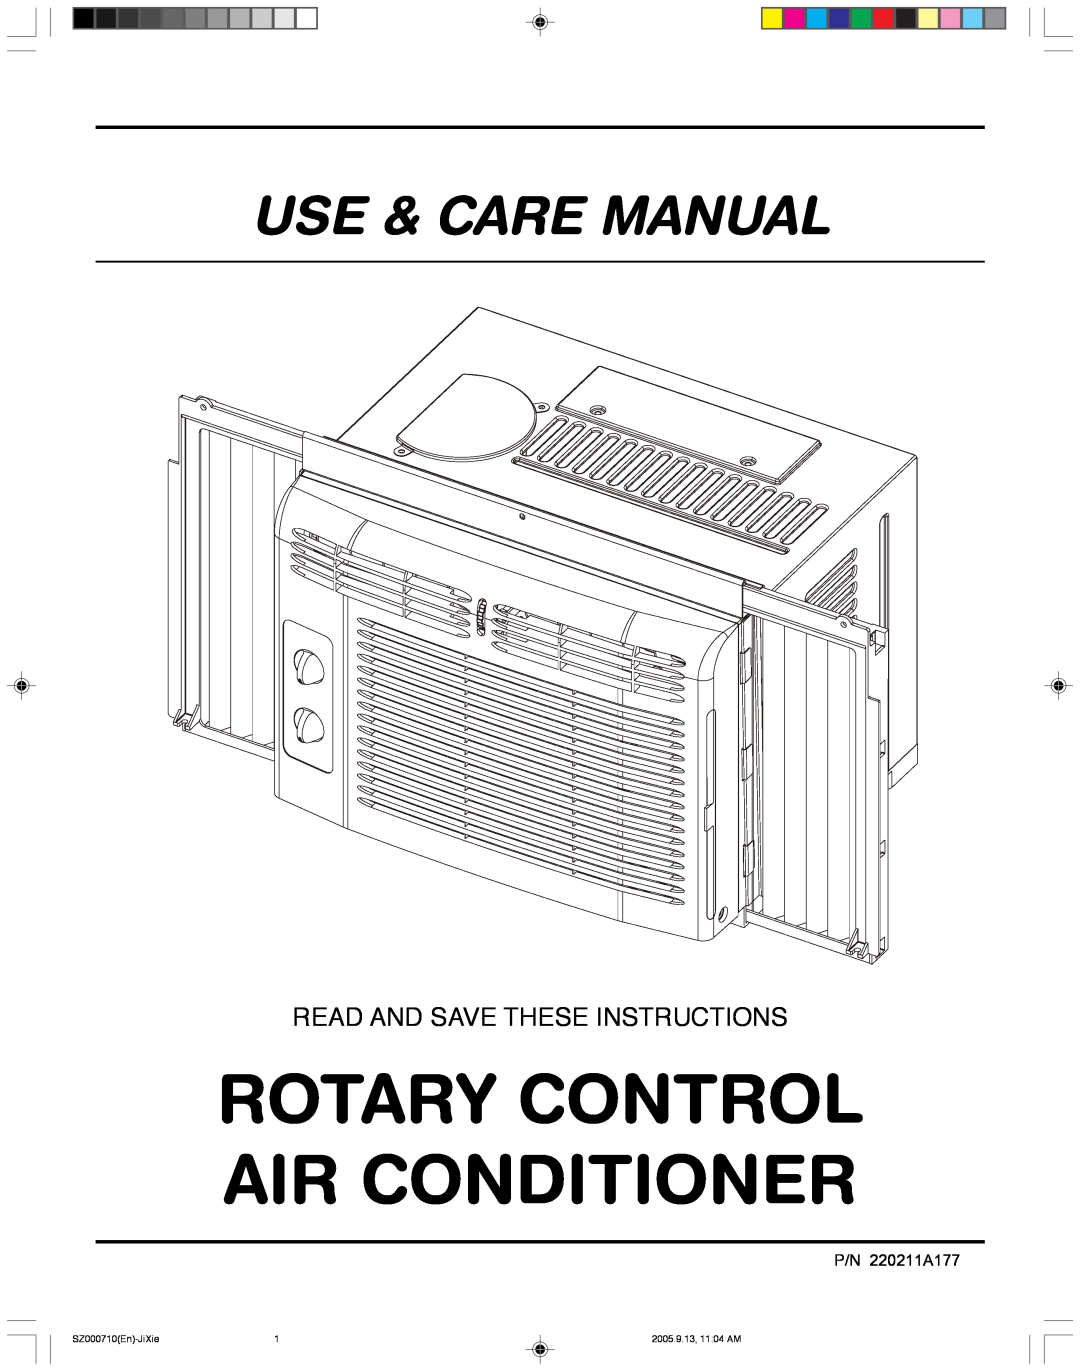 Frigidaire 220211A177 manual Rotary Control Air Conditioner, Use & Care Manual, Read And Save These Instructions 